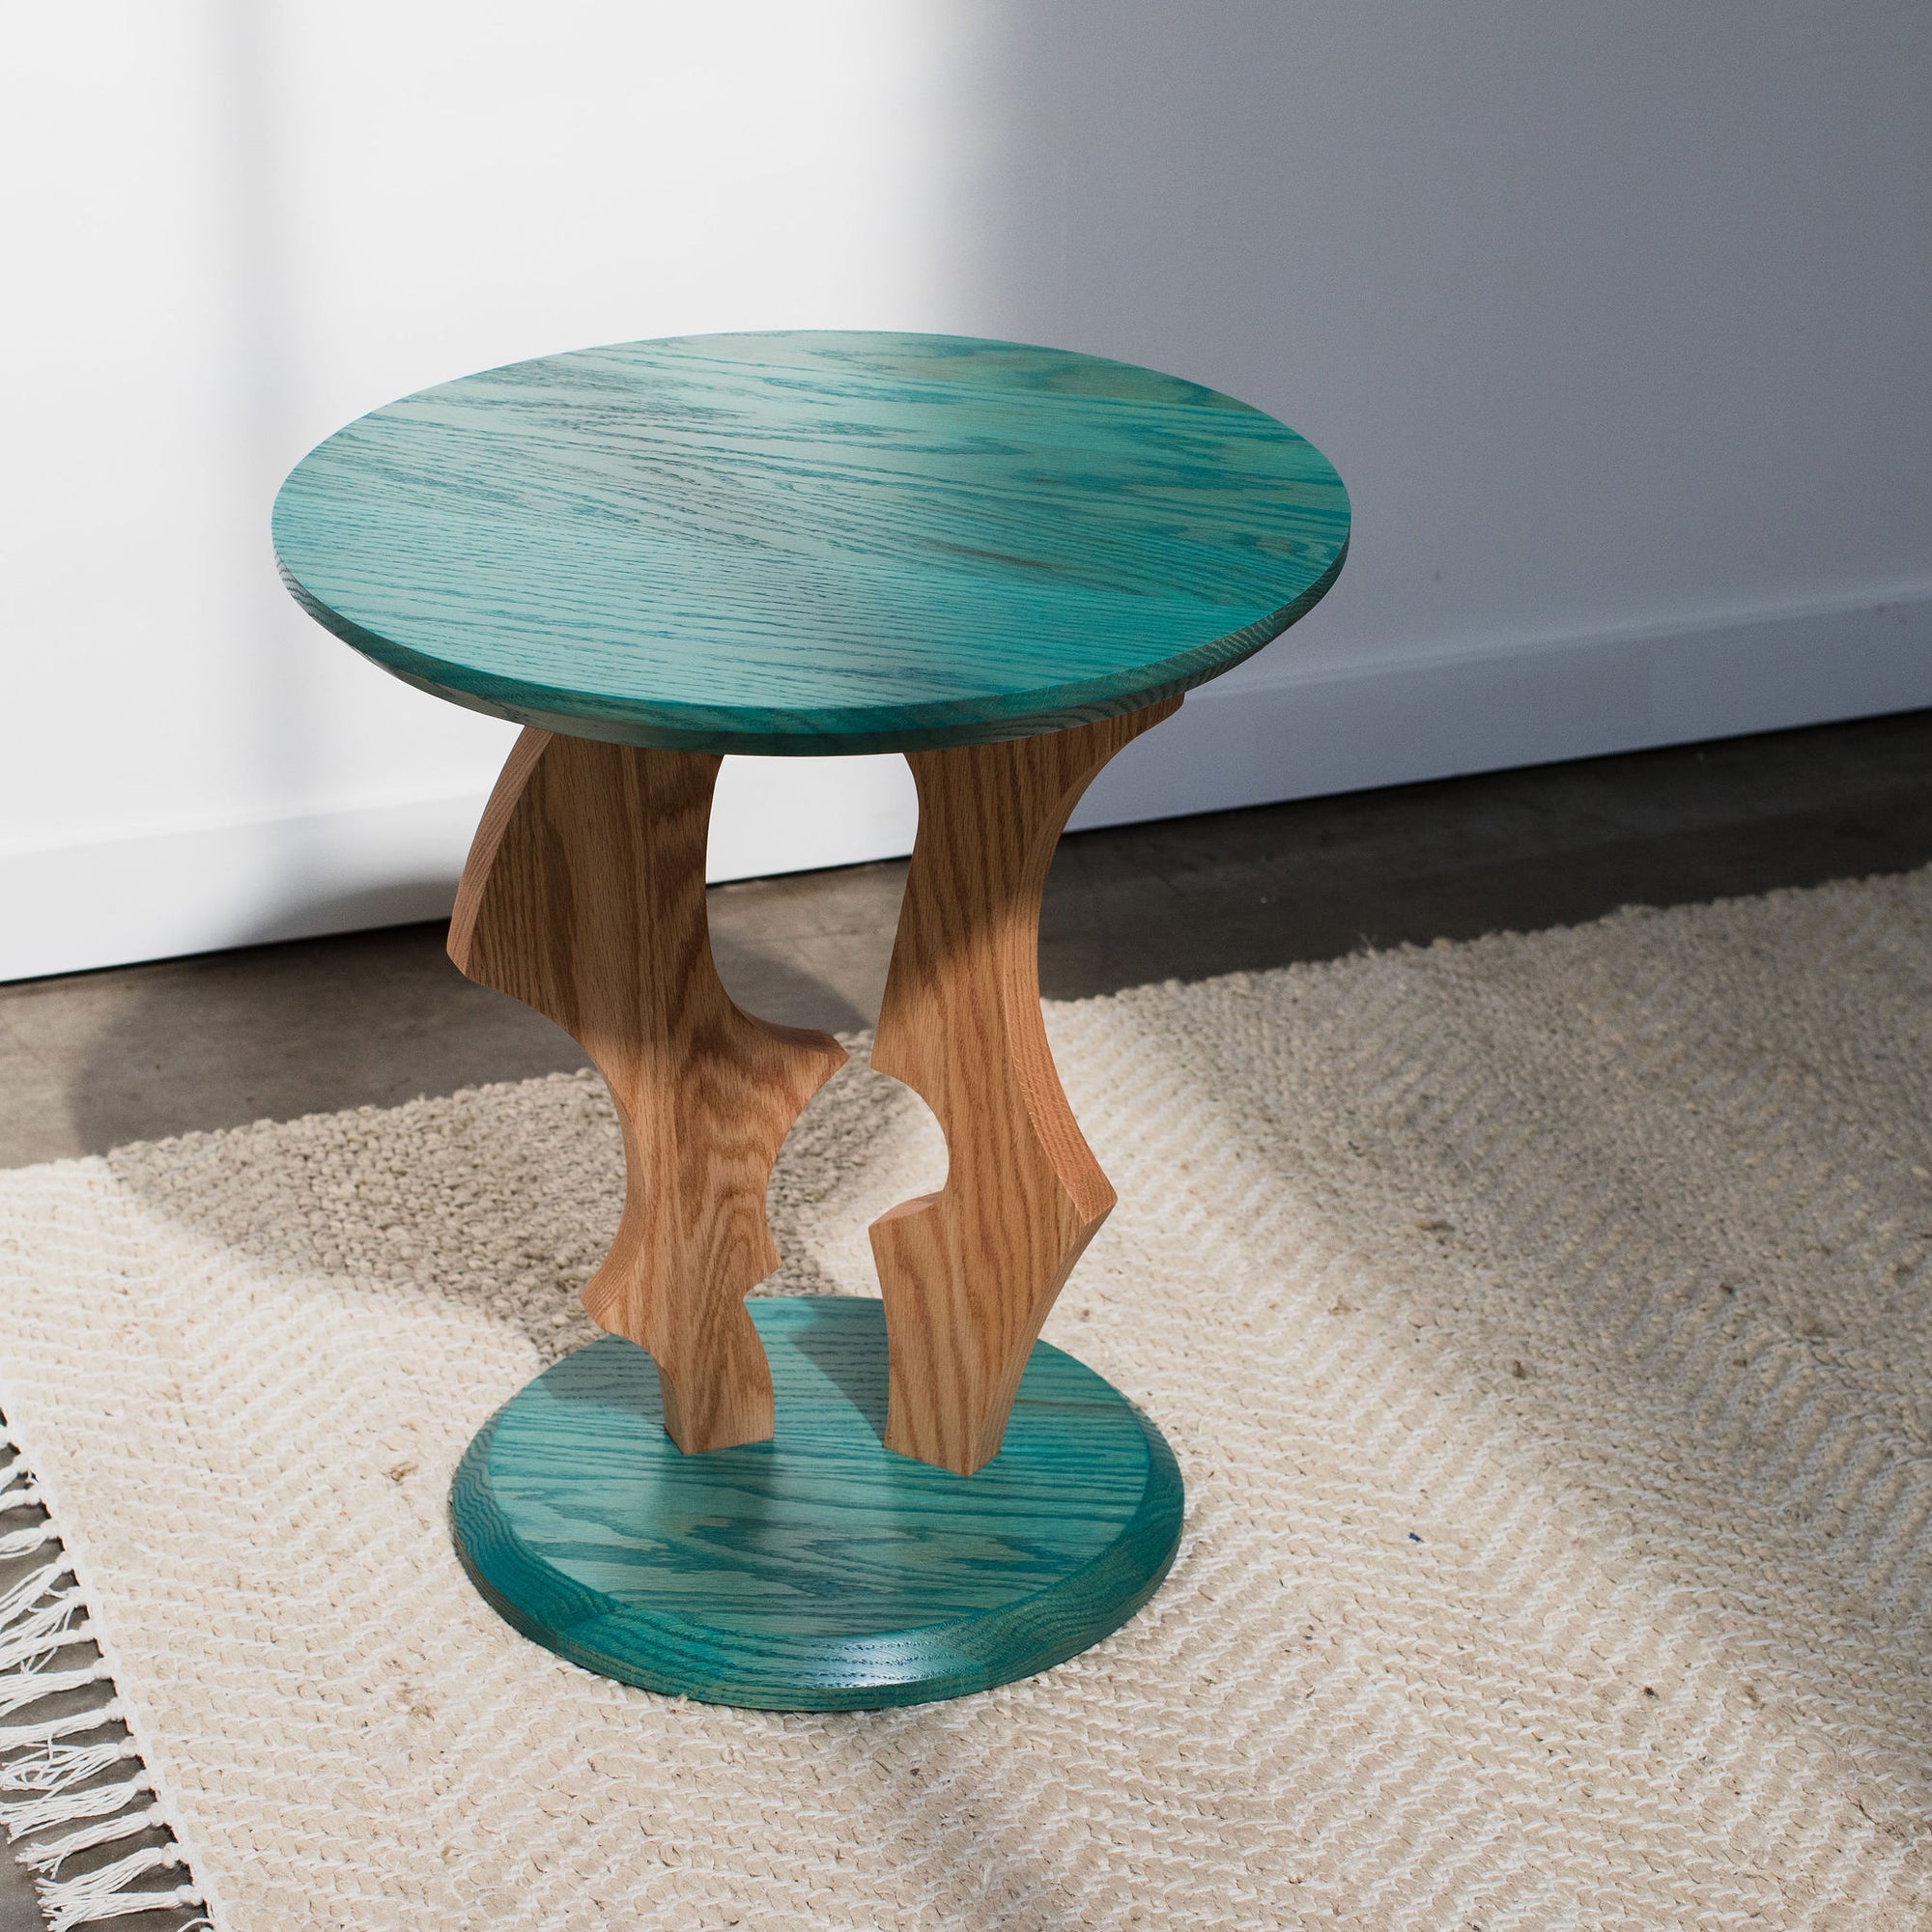 *SALE* The Pirouette Table - A graceful, solid oak side table